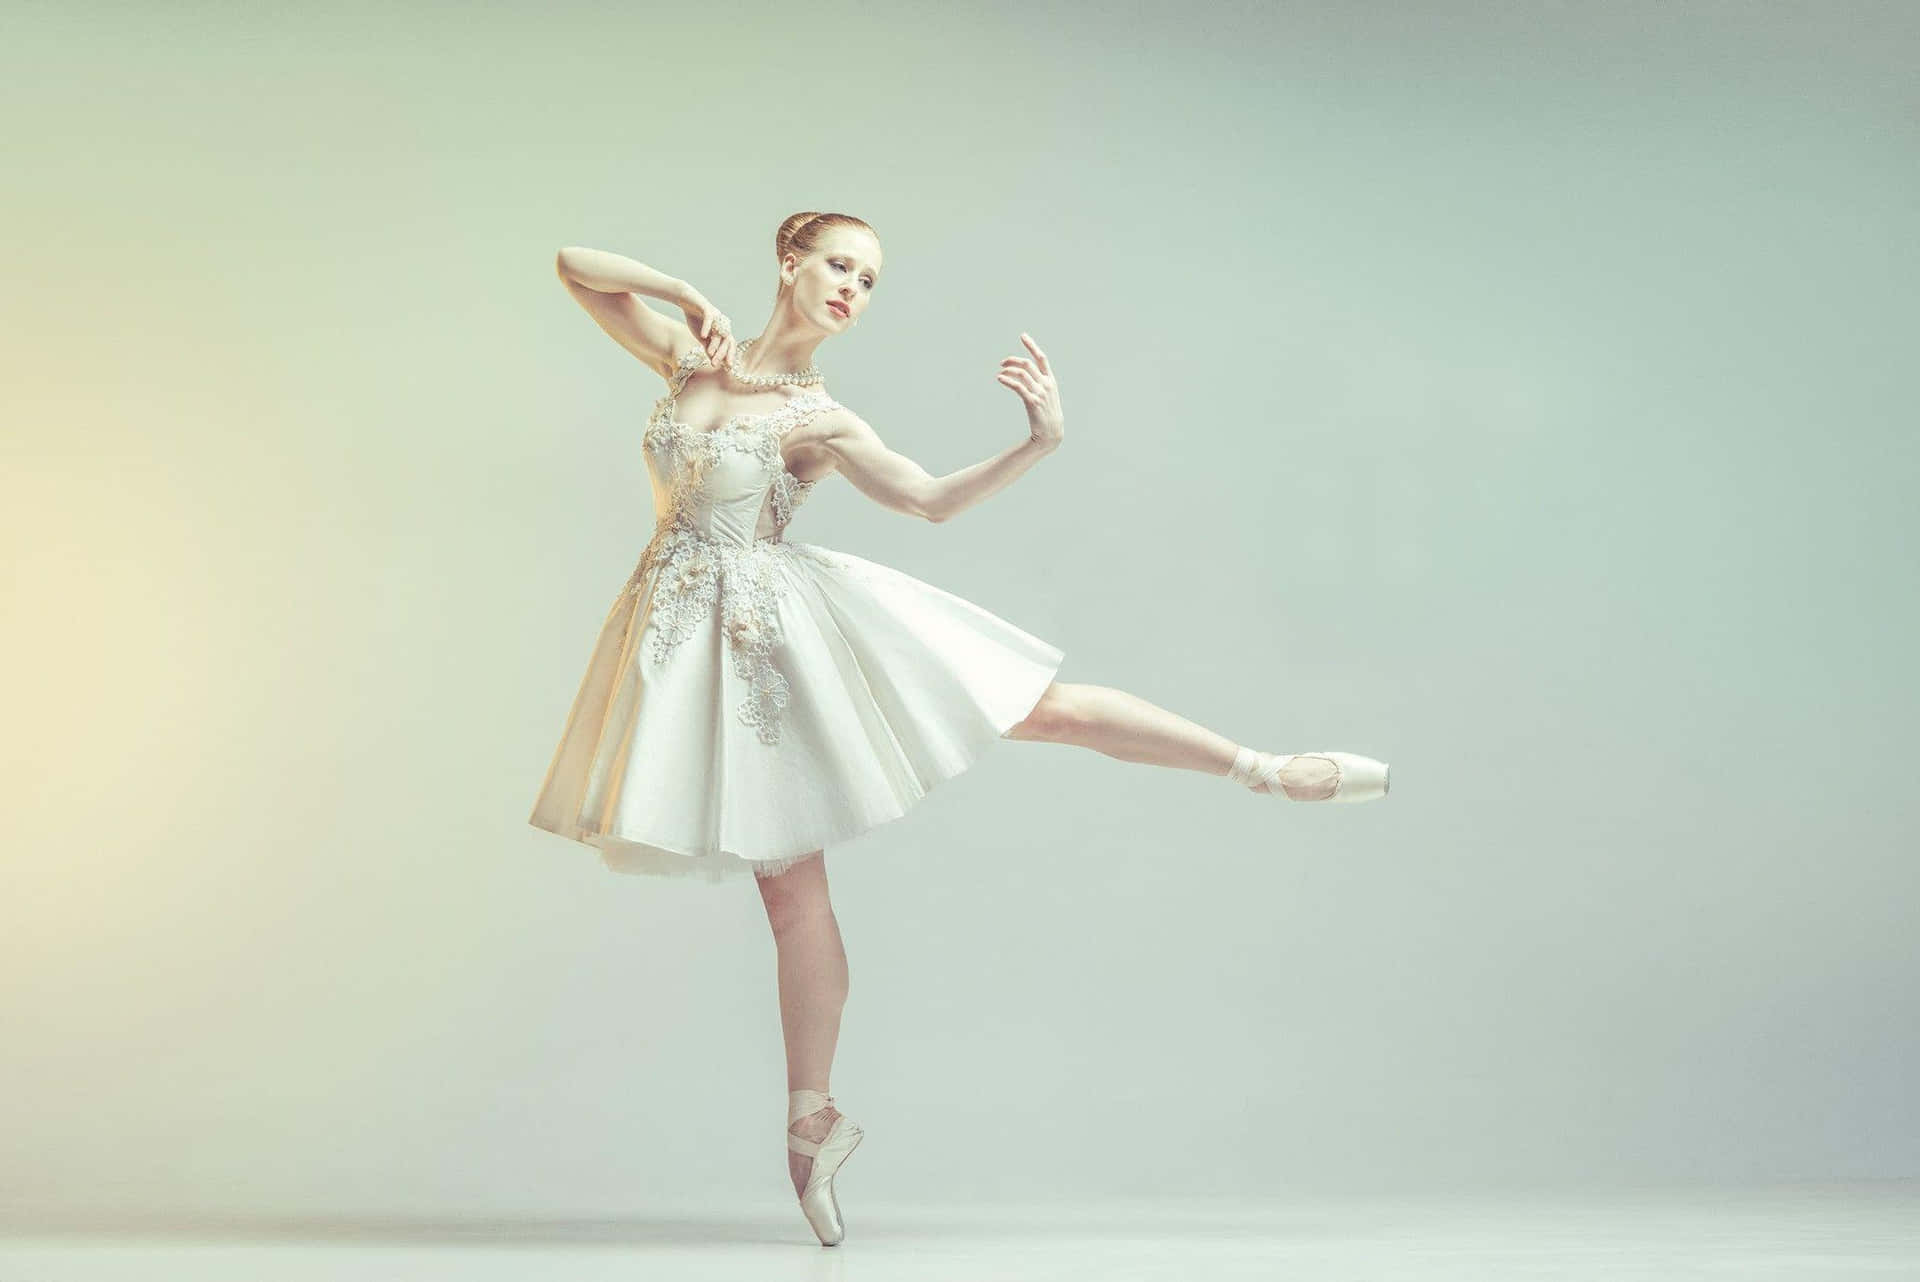 Captivating beauty of Ballet